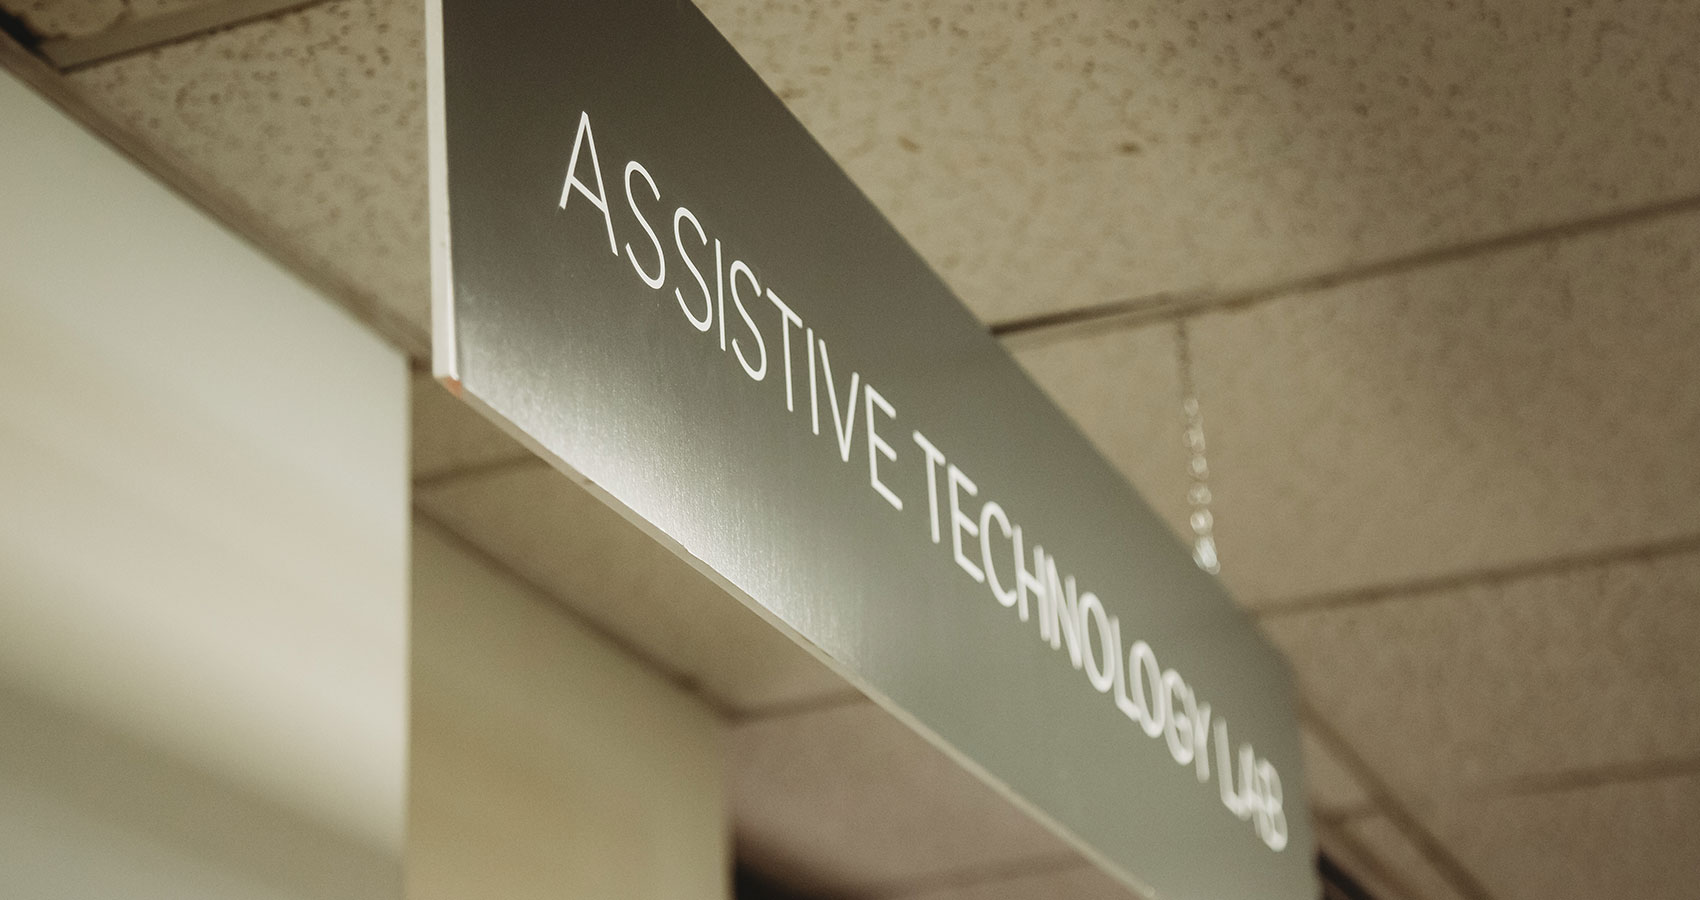 assistive technology lab sign